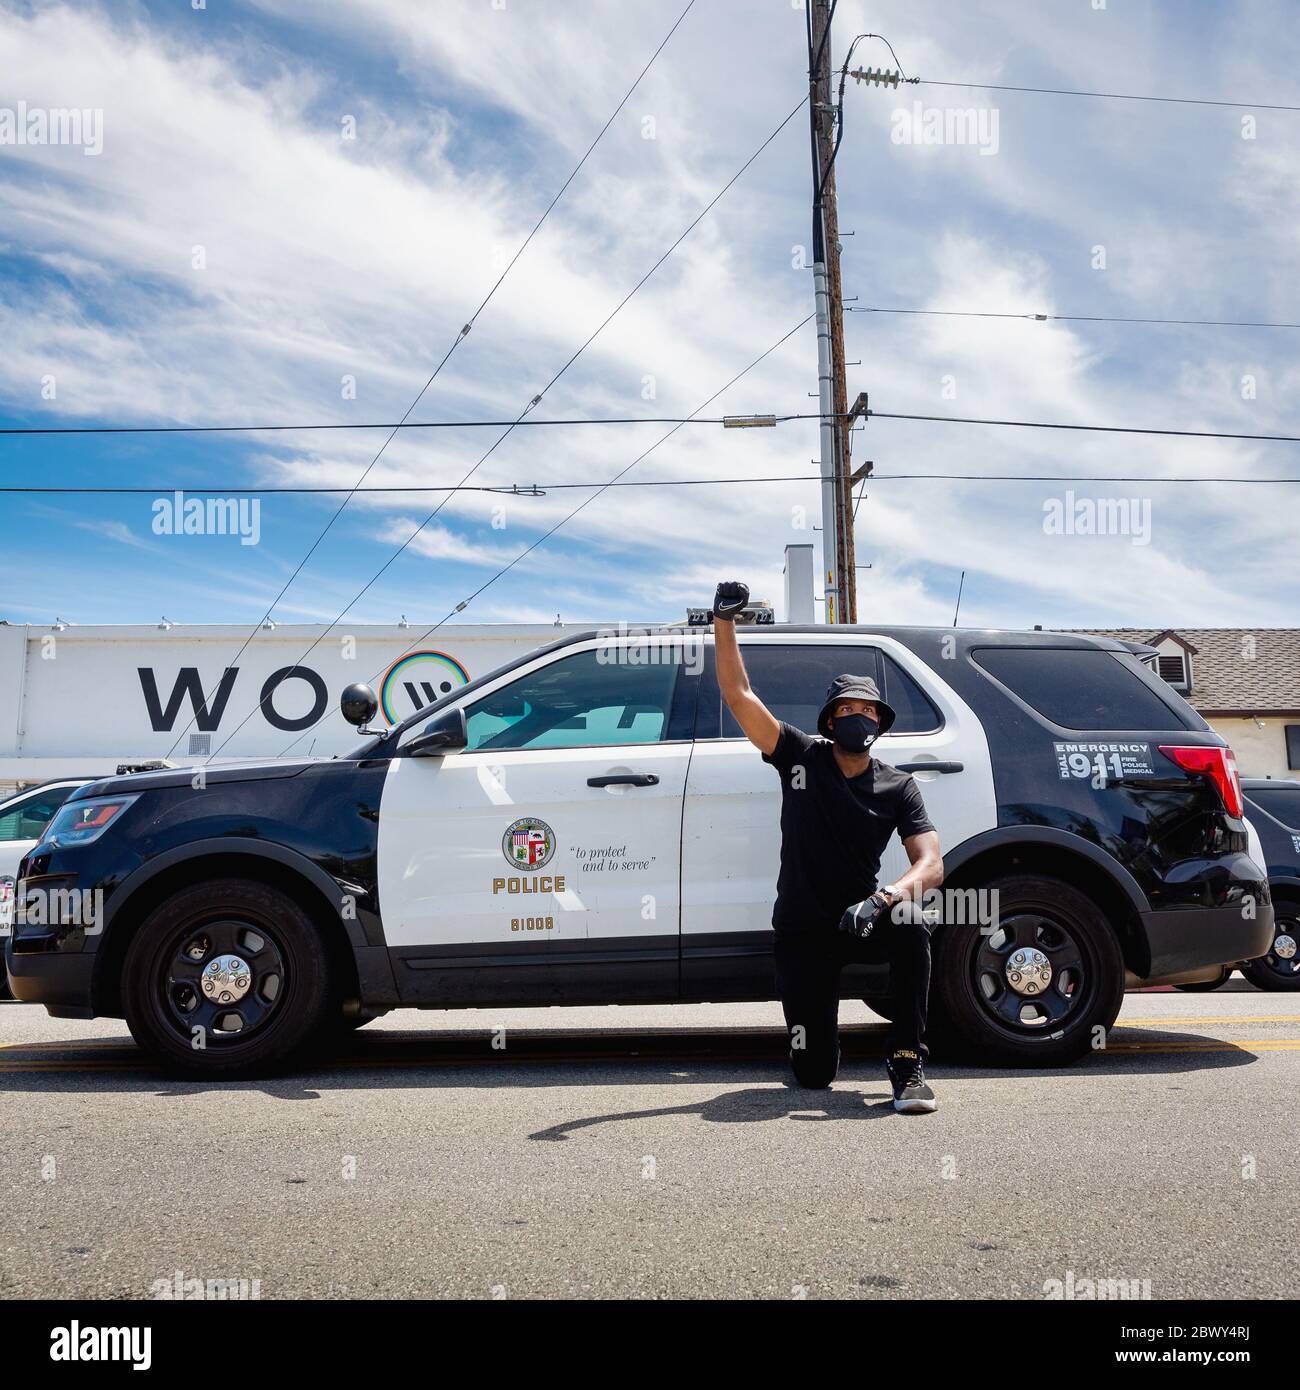 Man kneeling in front of police car, Black Lives Matter protest over the killing of George Floyd: Fairfax District, Los Angeles, CA, USA, May 30, 2020 Stock Photo